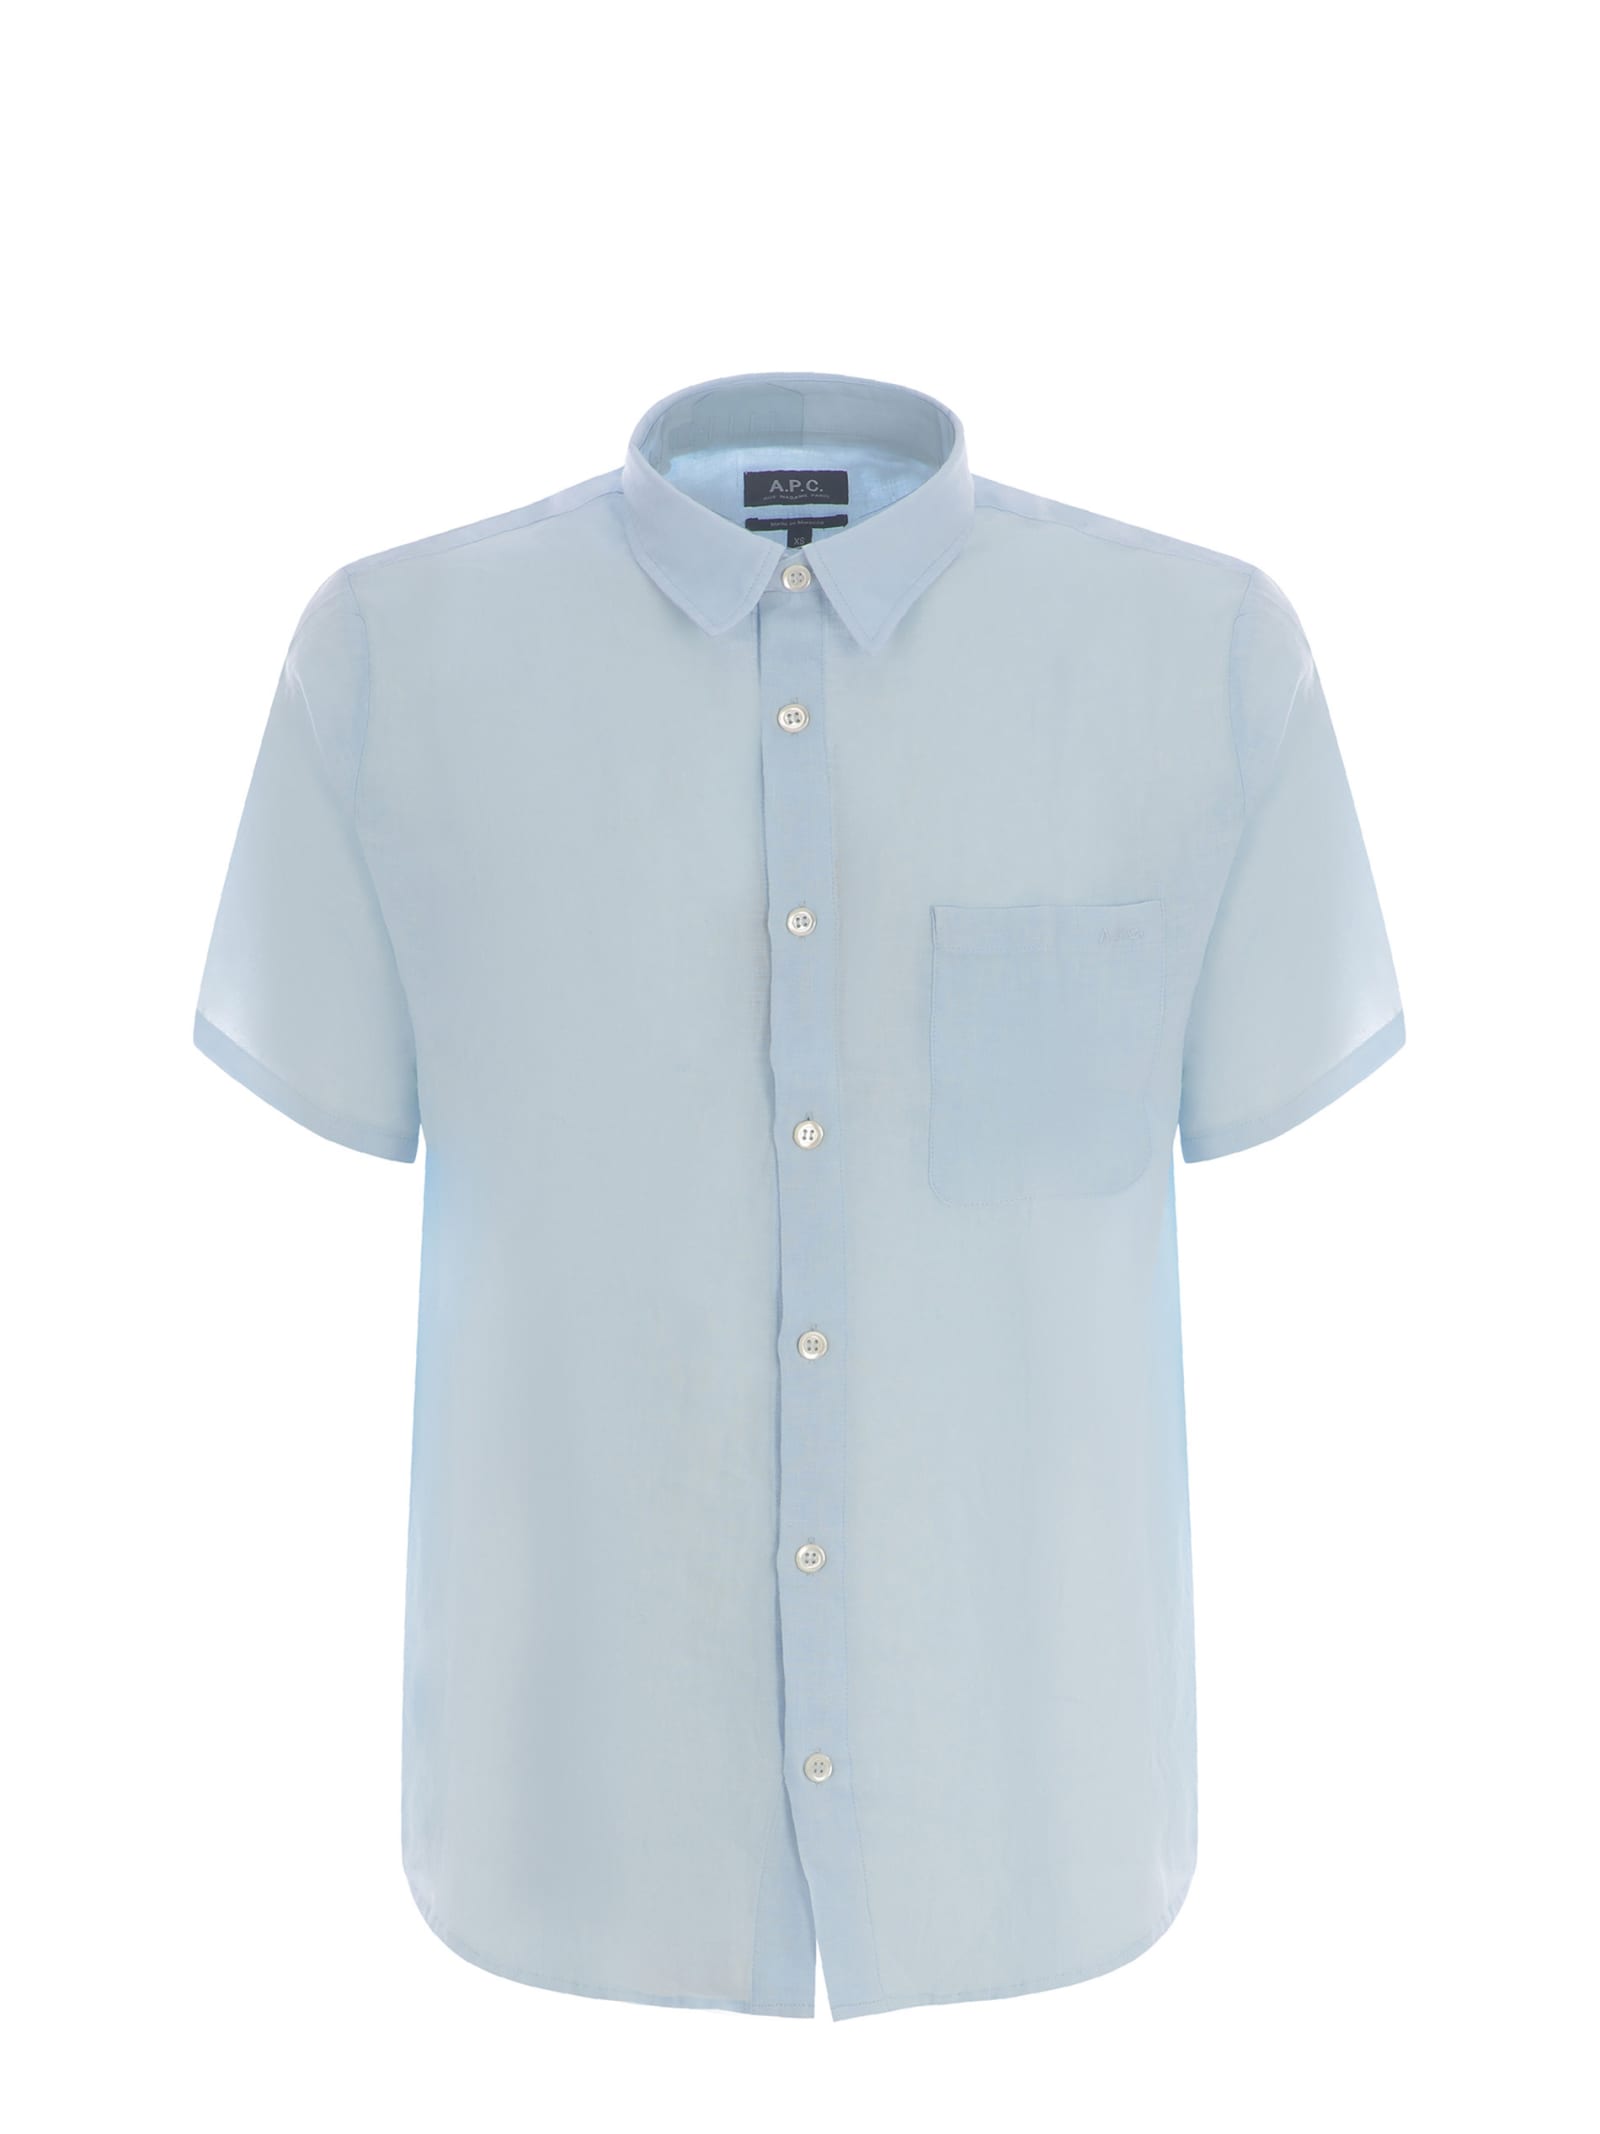 Apc Shirt A.p.c. Bellini Made Of Linen In Light Blue